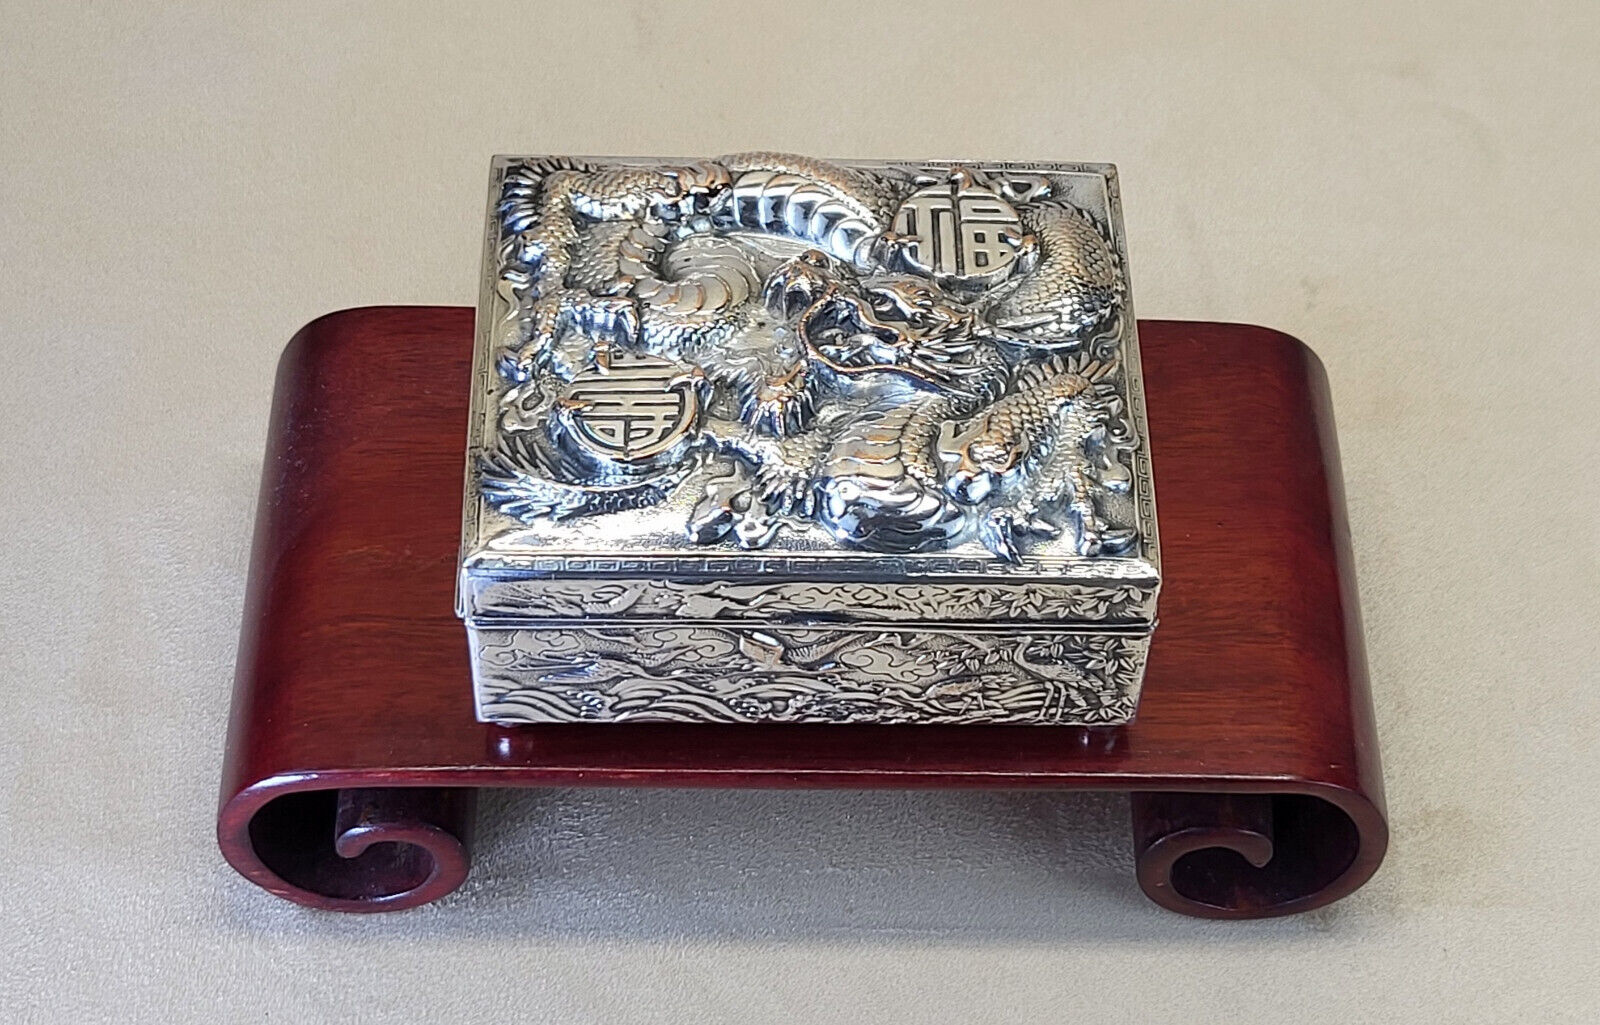 Remarkable Taishō Era Silverplated Box high relief cast dragon repousse & cranes